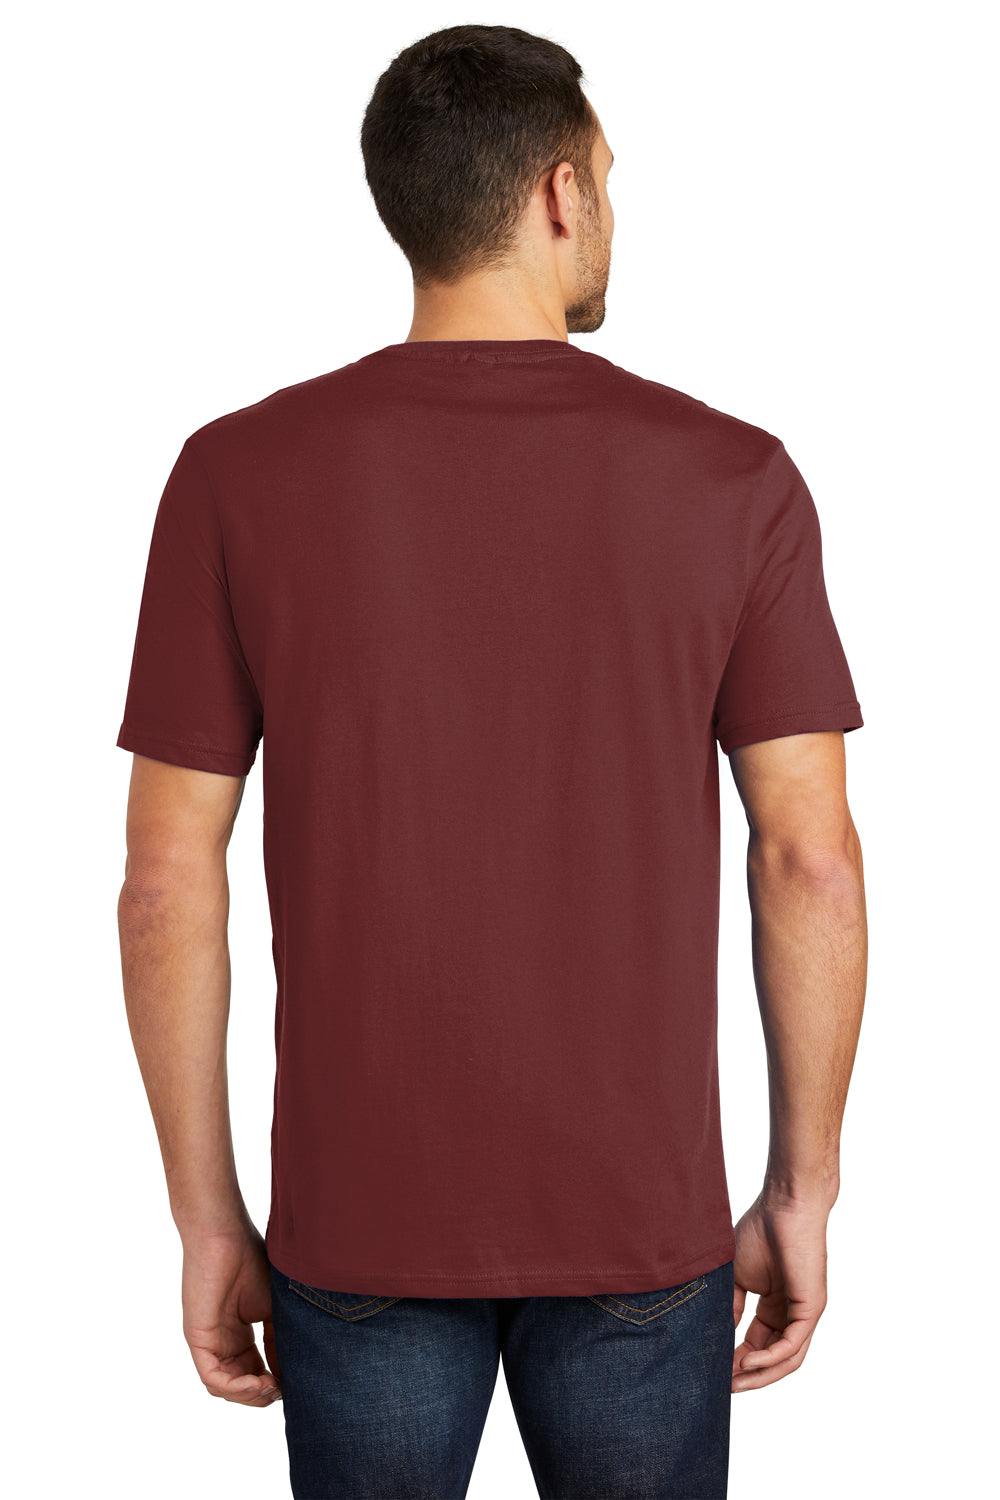 District DT104 Mens Perfect Weight Short Sleeve Crewneck T-Shirt Sangria Red Back